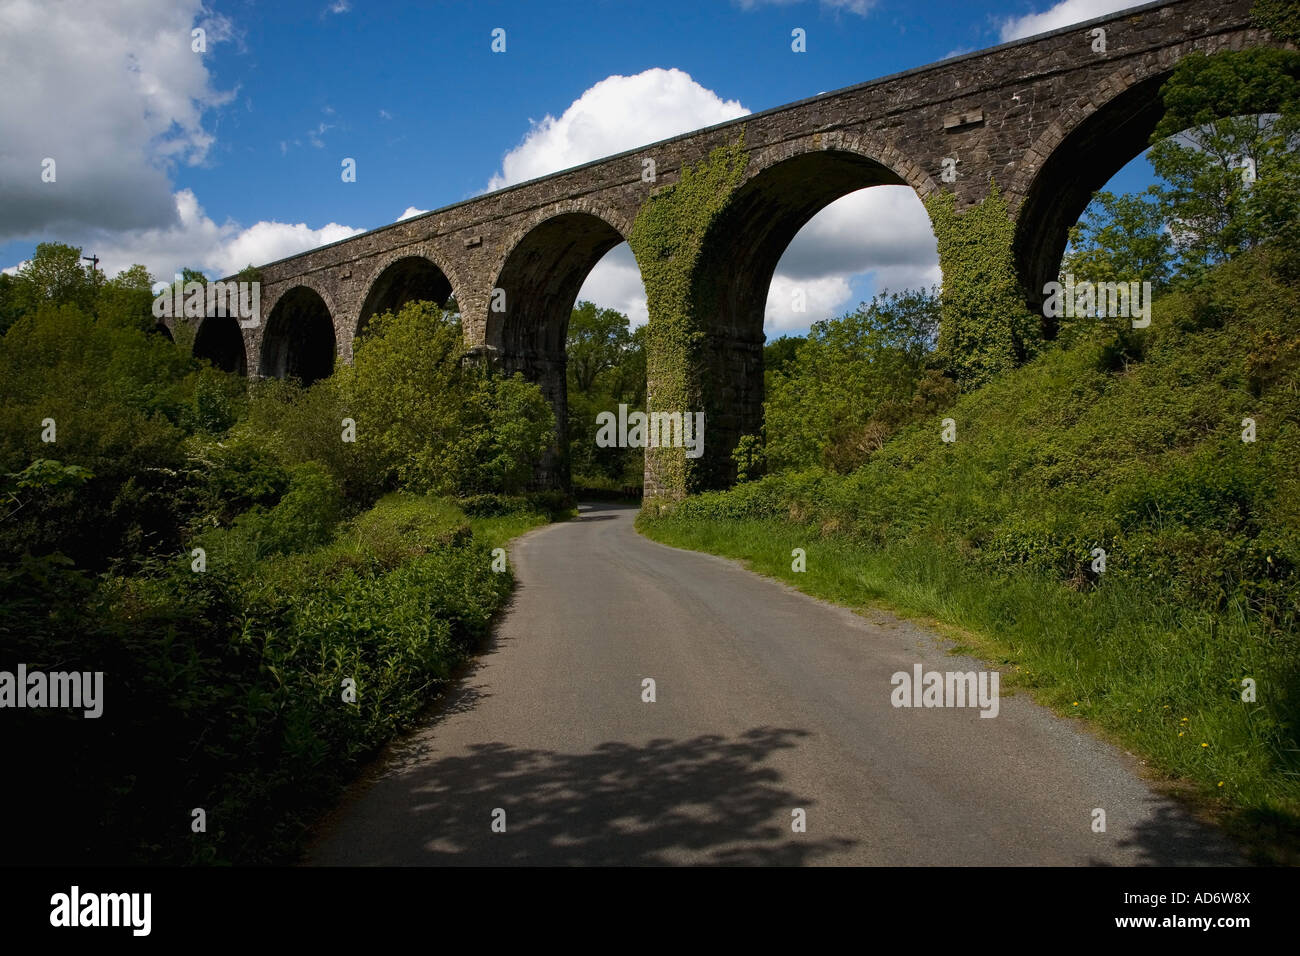 Railway Viaduct on the disused Waterford to Dungarvan Line, now part of the Deise Greenway Track, Kilmacthomas, County Waterford, Ireland Stock Photo